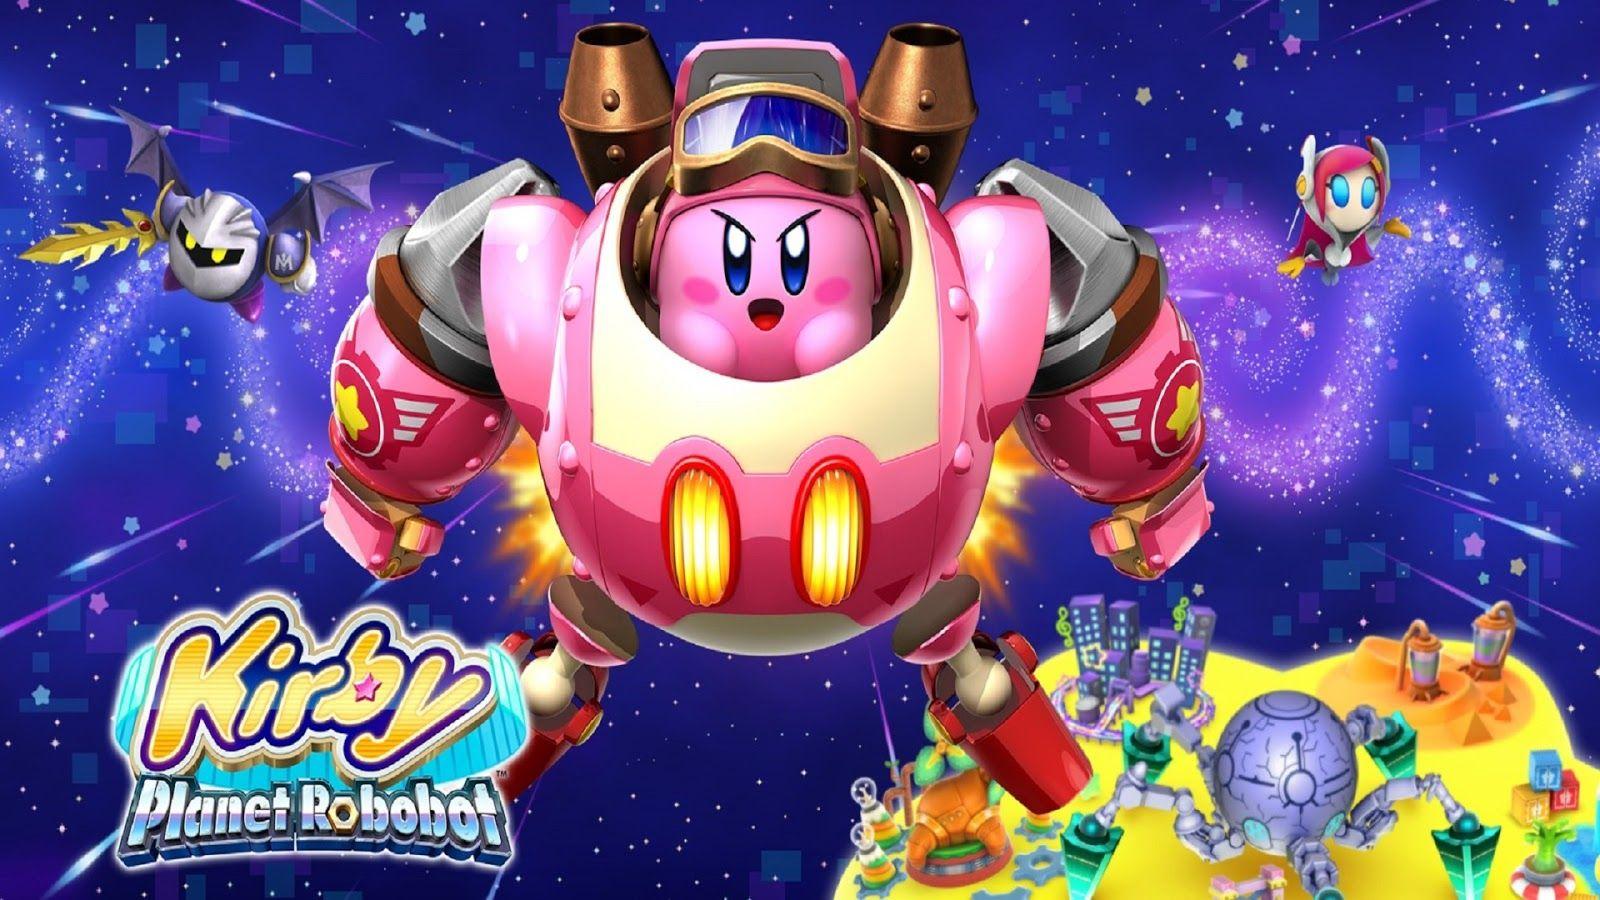 Download Kirby Star Allies HD Wallpapers.